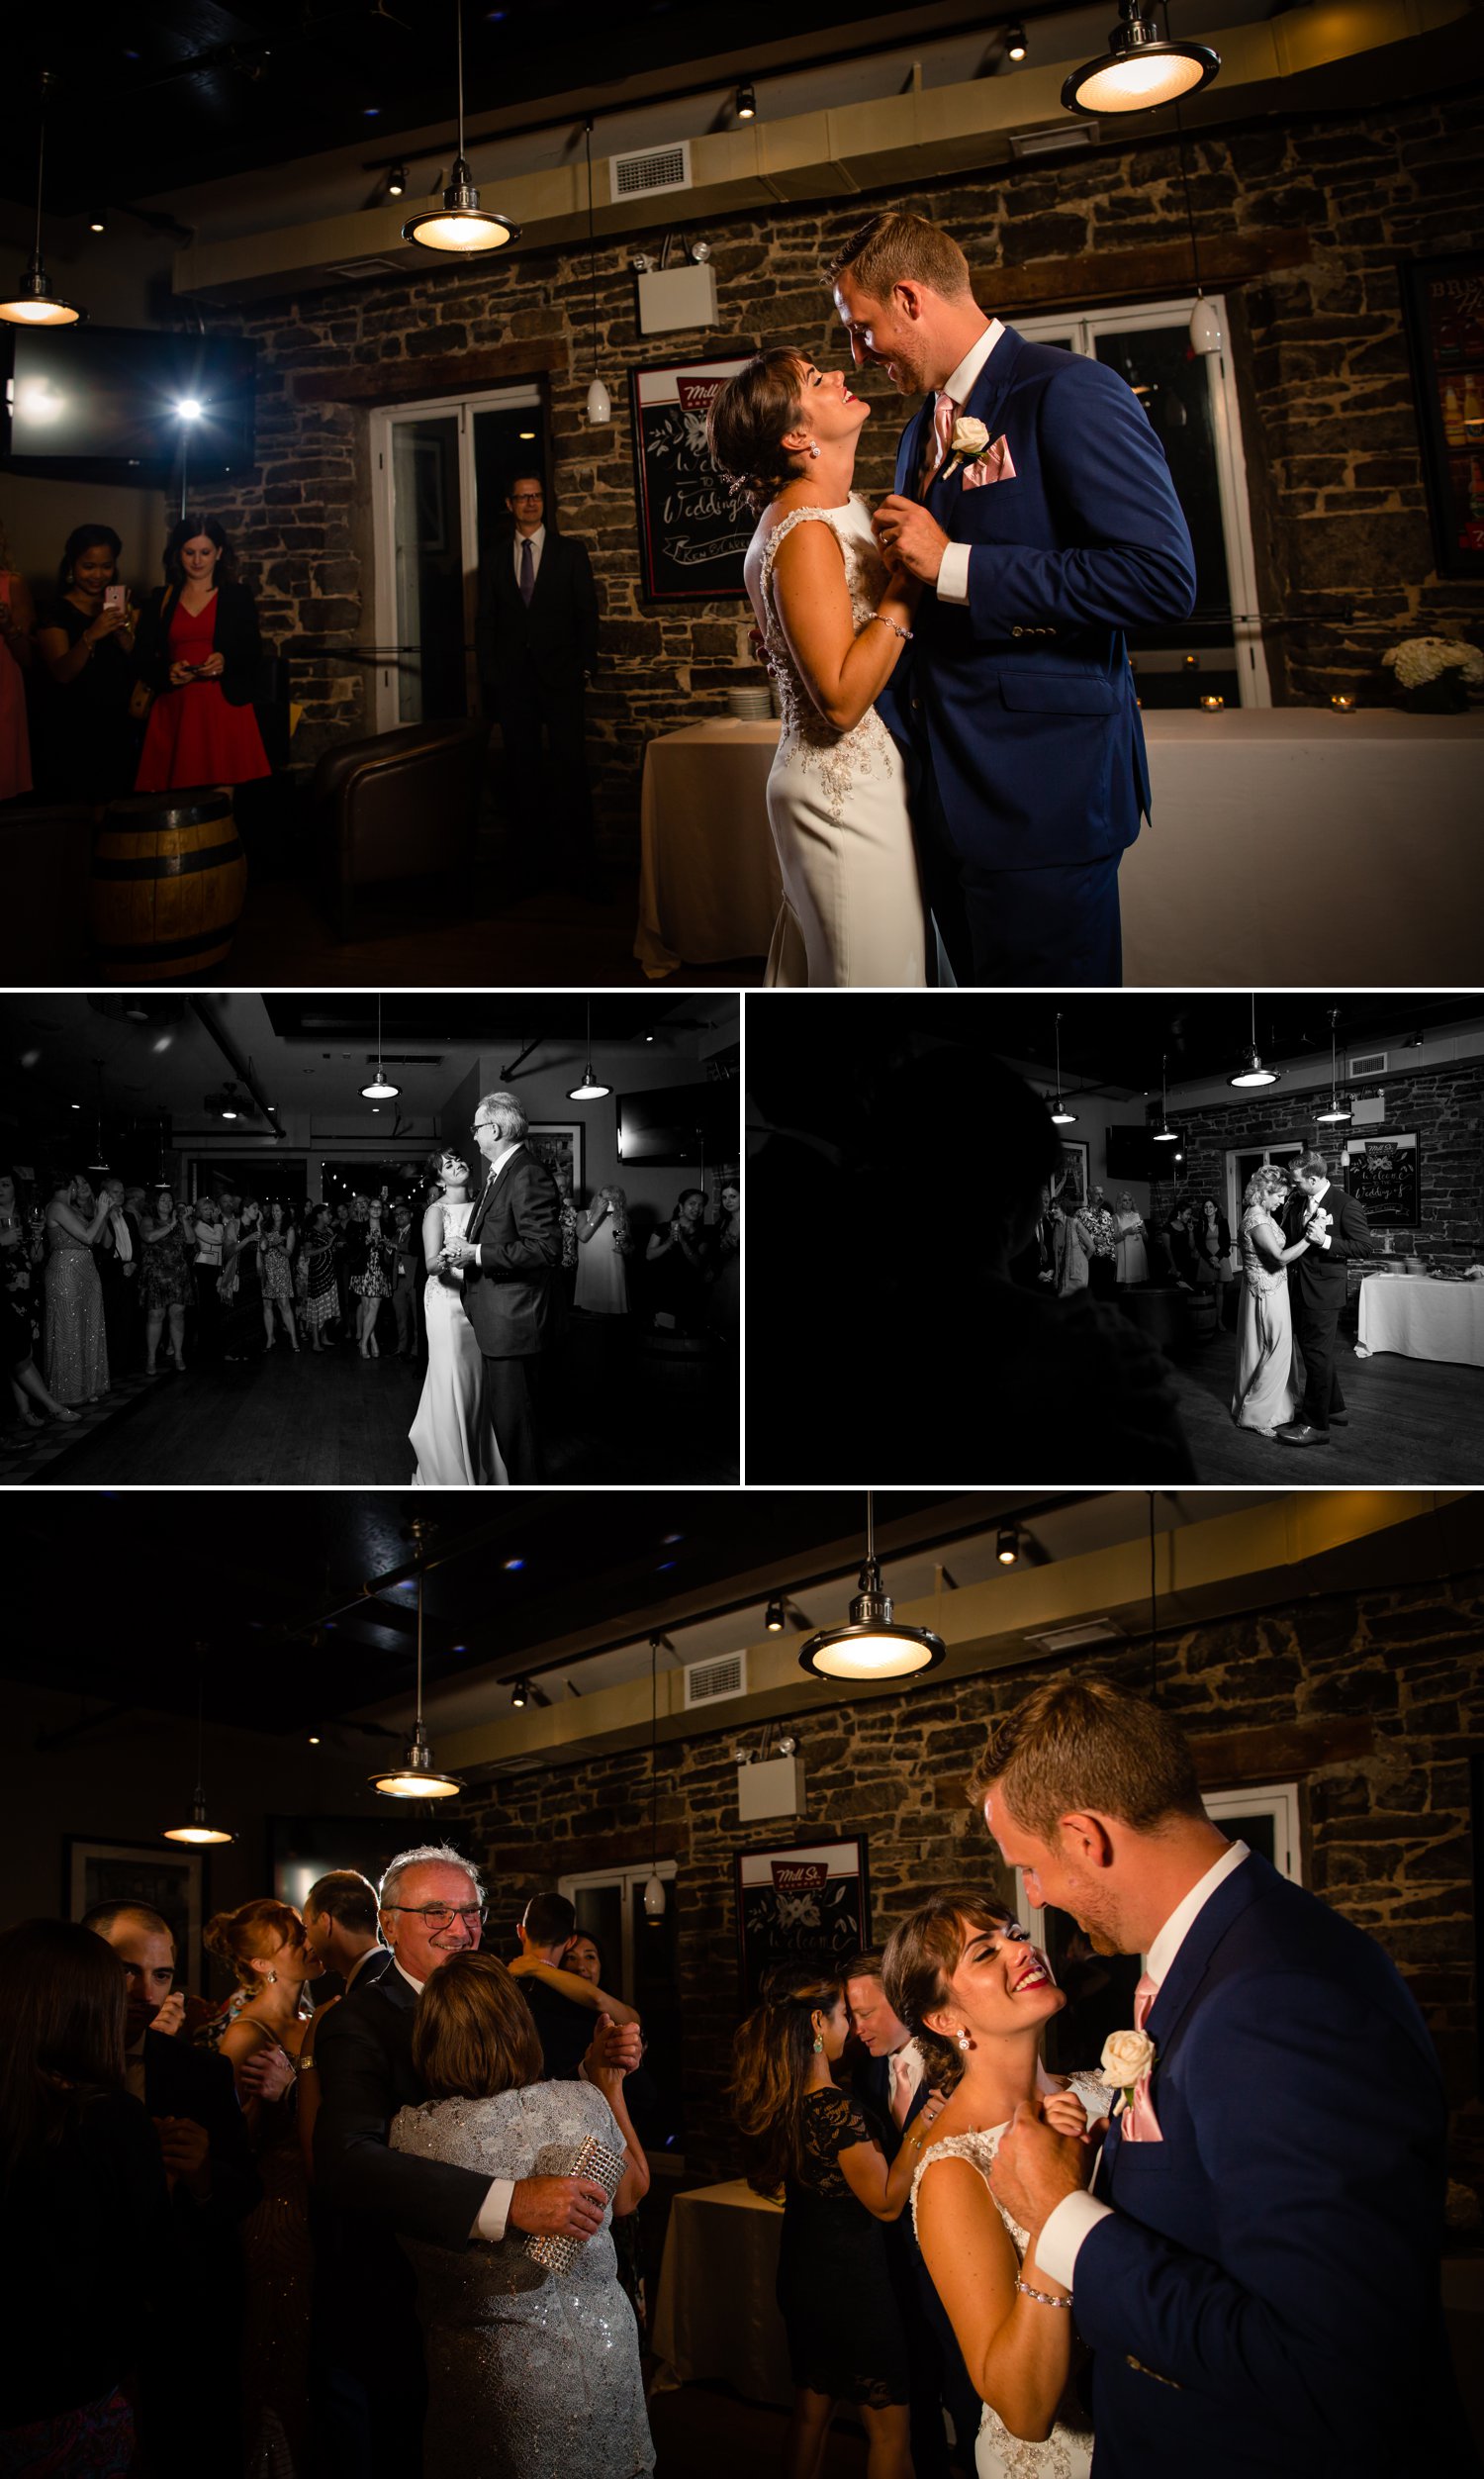 The bride and groom during their first dances at their wedding reception at The Mill St Brew Pub in downtown Ottawa